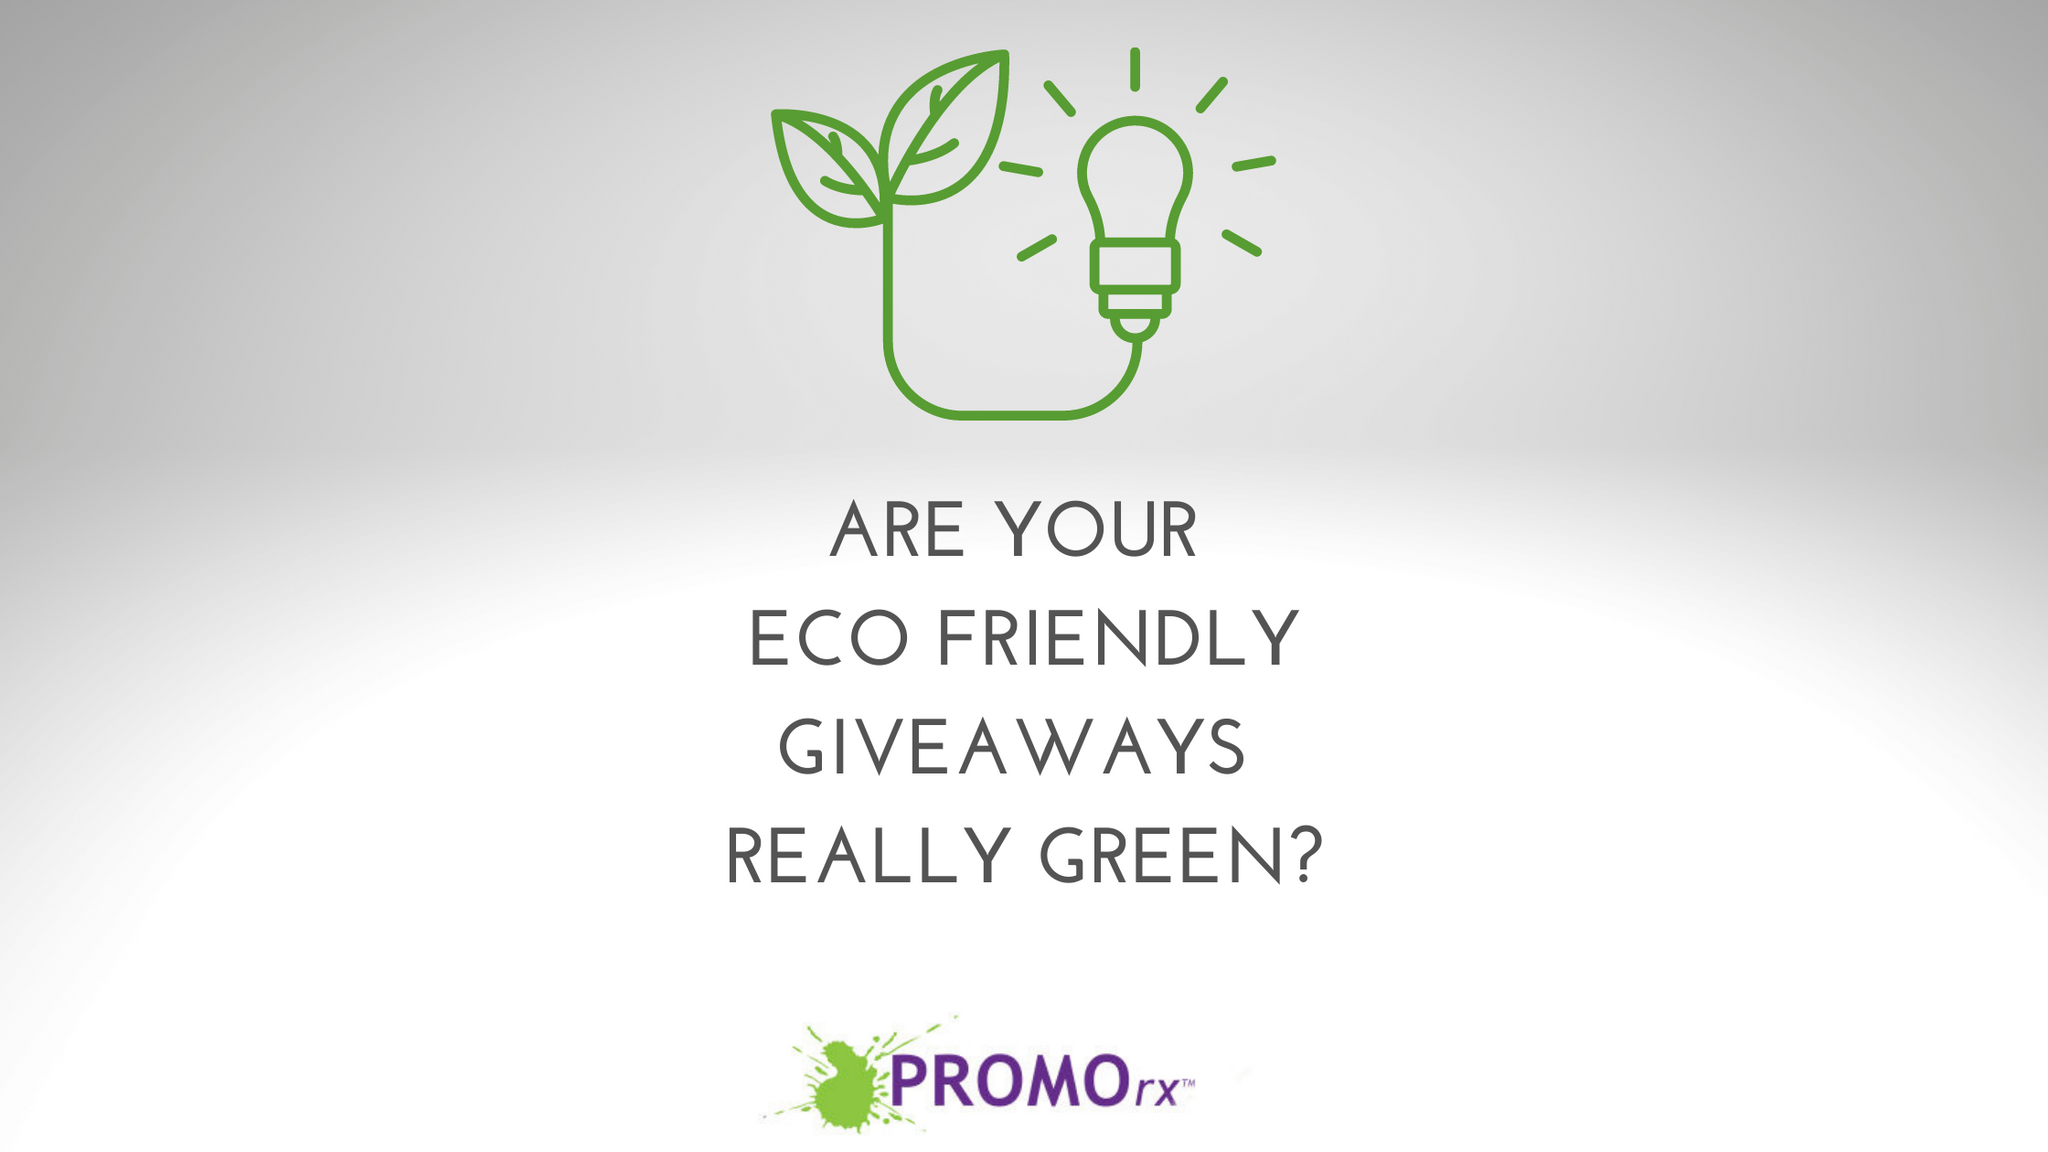 Are Your Eco Friendly Giveaways REALLY Green?